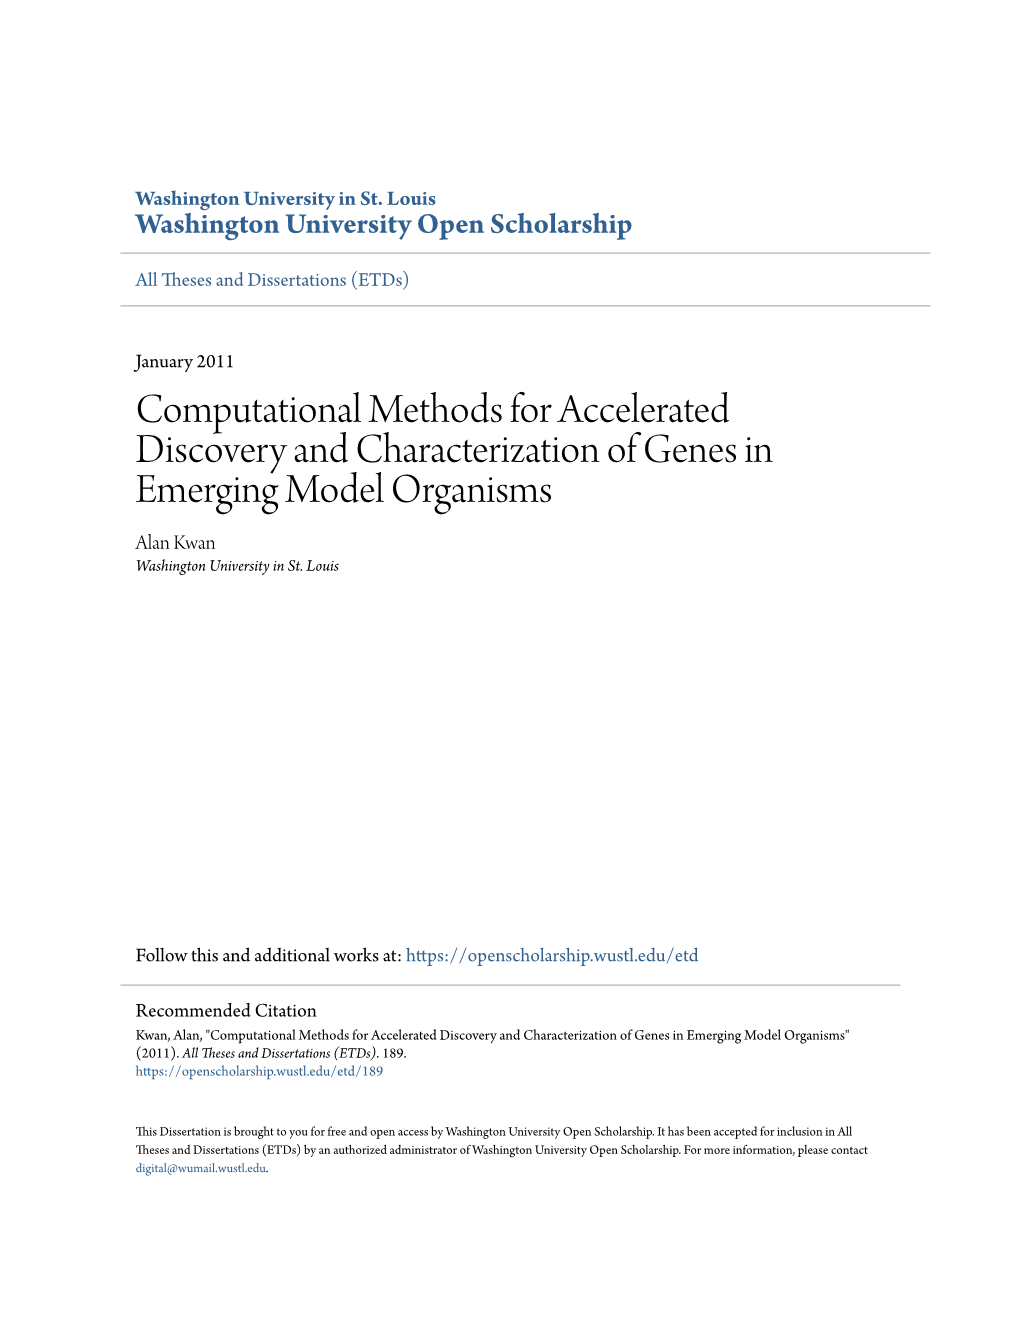 Computational Methods for Accelerated Discovery and Characterization of Genes in Emerging Model Organisms Alan Kwan Washington University in St